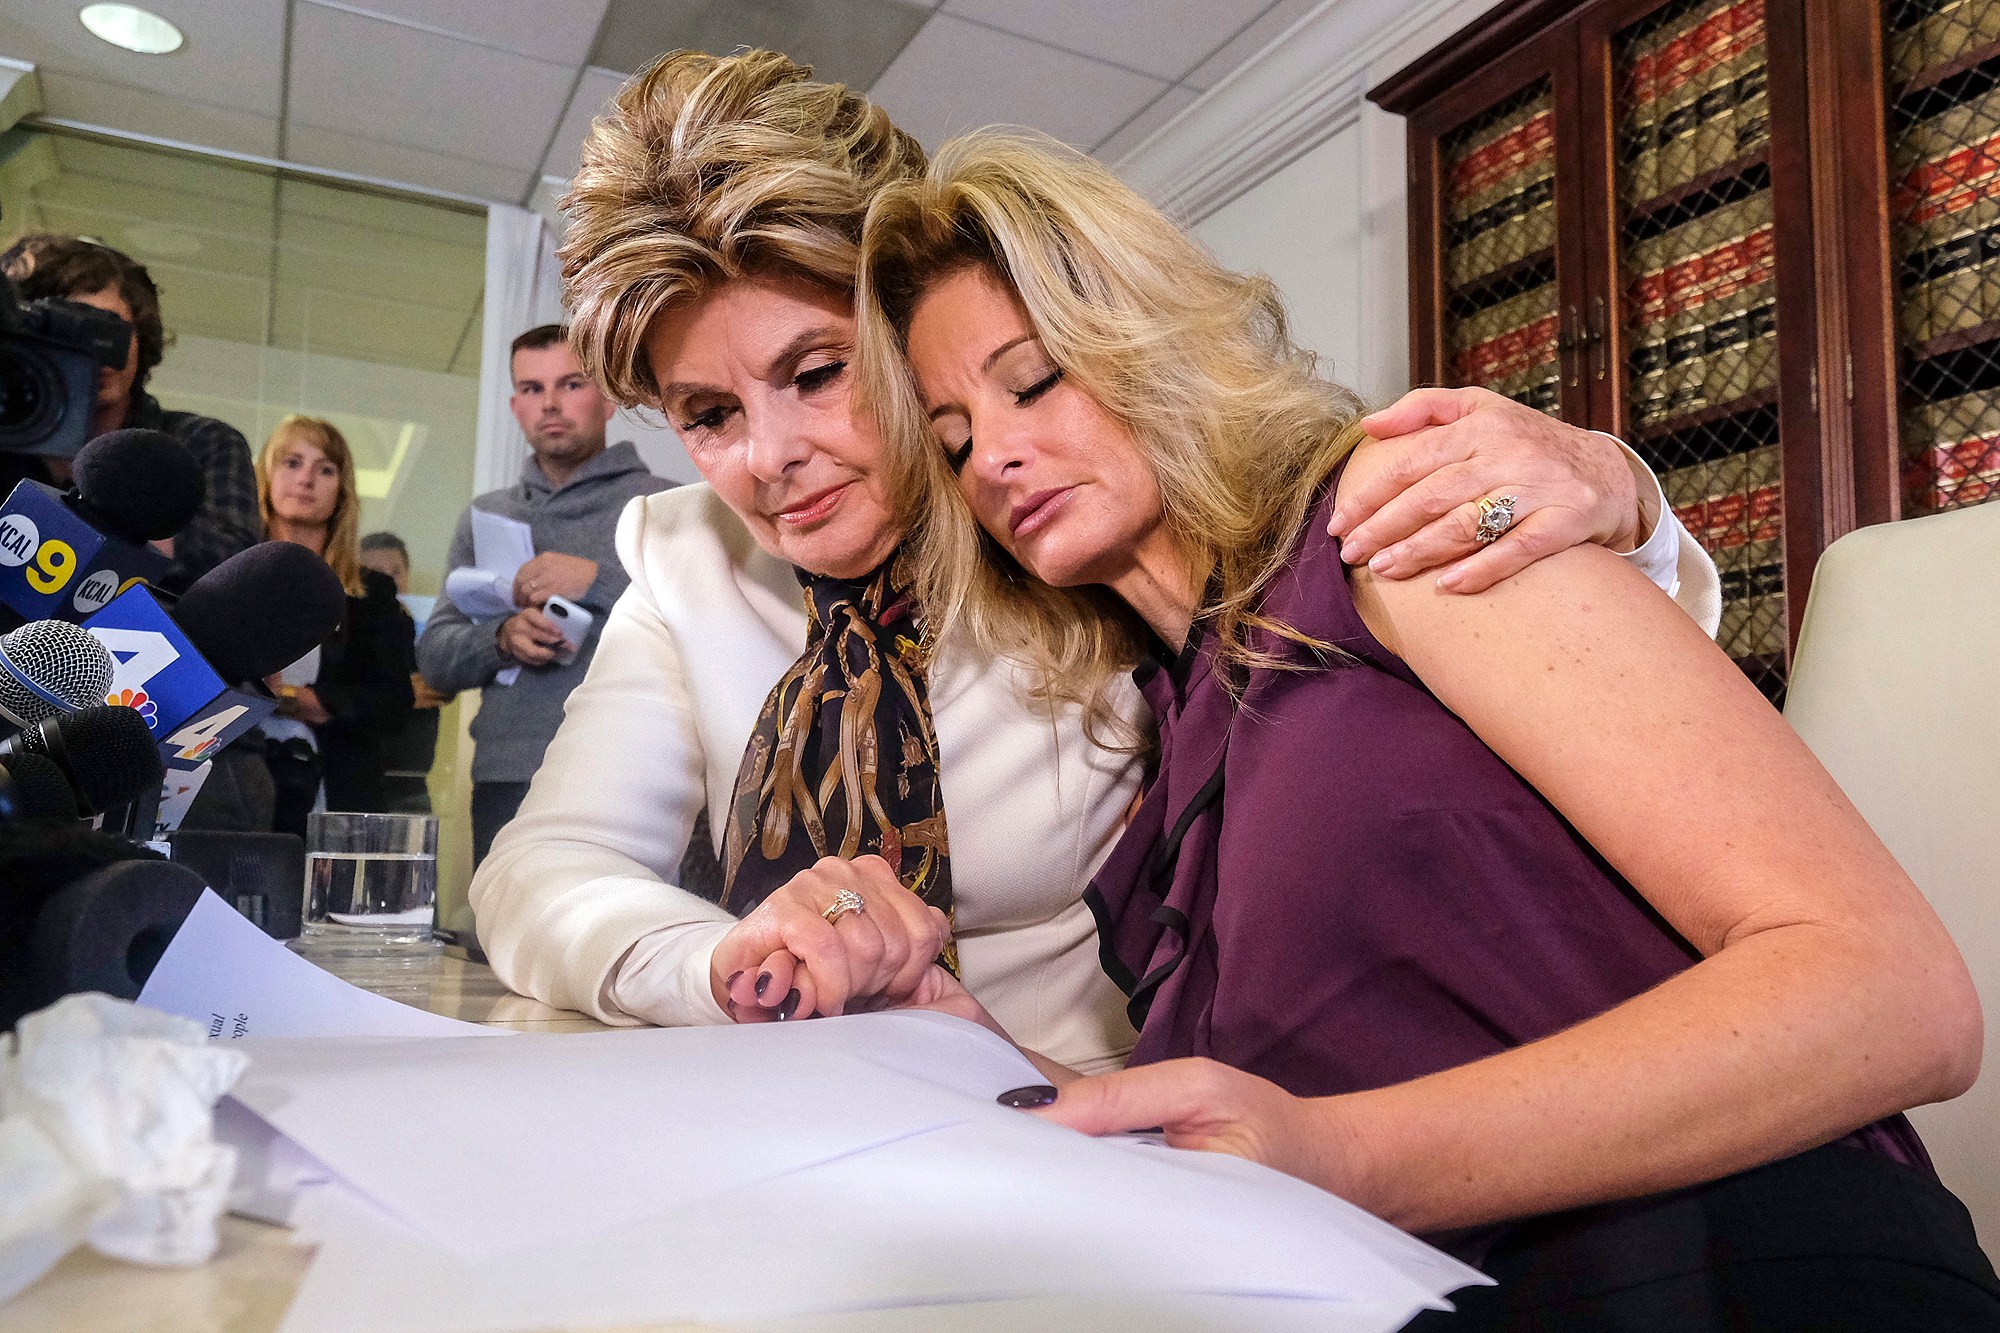 Attorney Gloria Allred, left, comforts Summer Zervos during a news conference in Los Angeles, Friday Oct. 14, 2016. Zervos, a former contestant on "The Apprentice" says Republican presidential candidate Donald Trump made unwanted sexual contact with her at a Beverly Hills hotel in 2007. Zervos is among several women who have made sexual allegations against the Republican nominee. He has strenuously denied them. (AP Photo/Ringo H.W. Chiu)